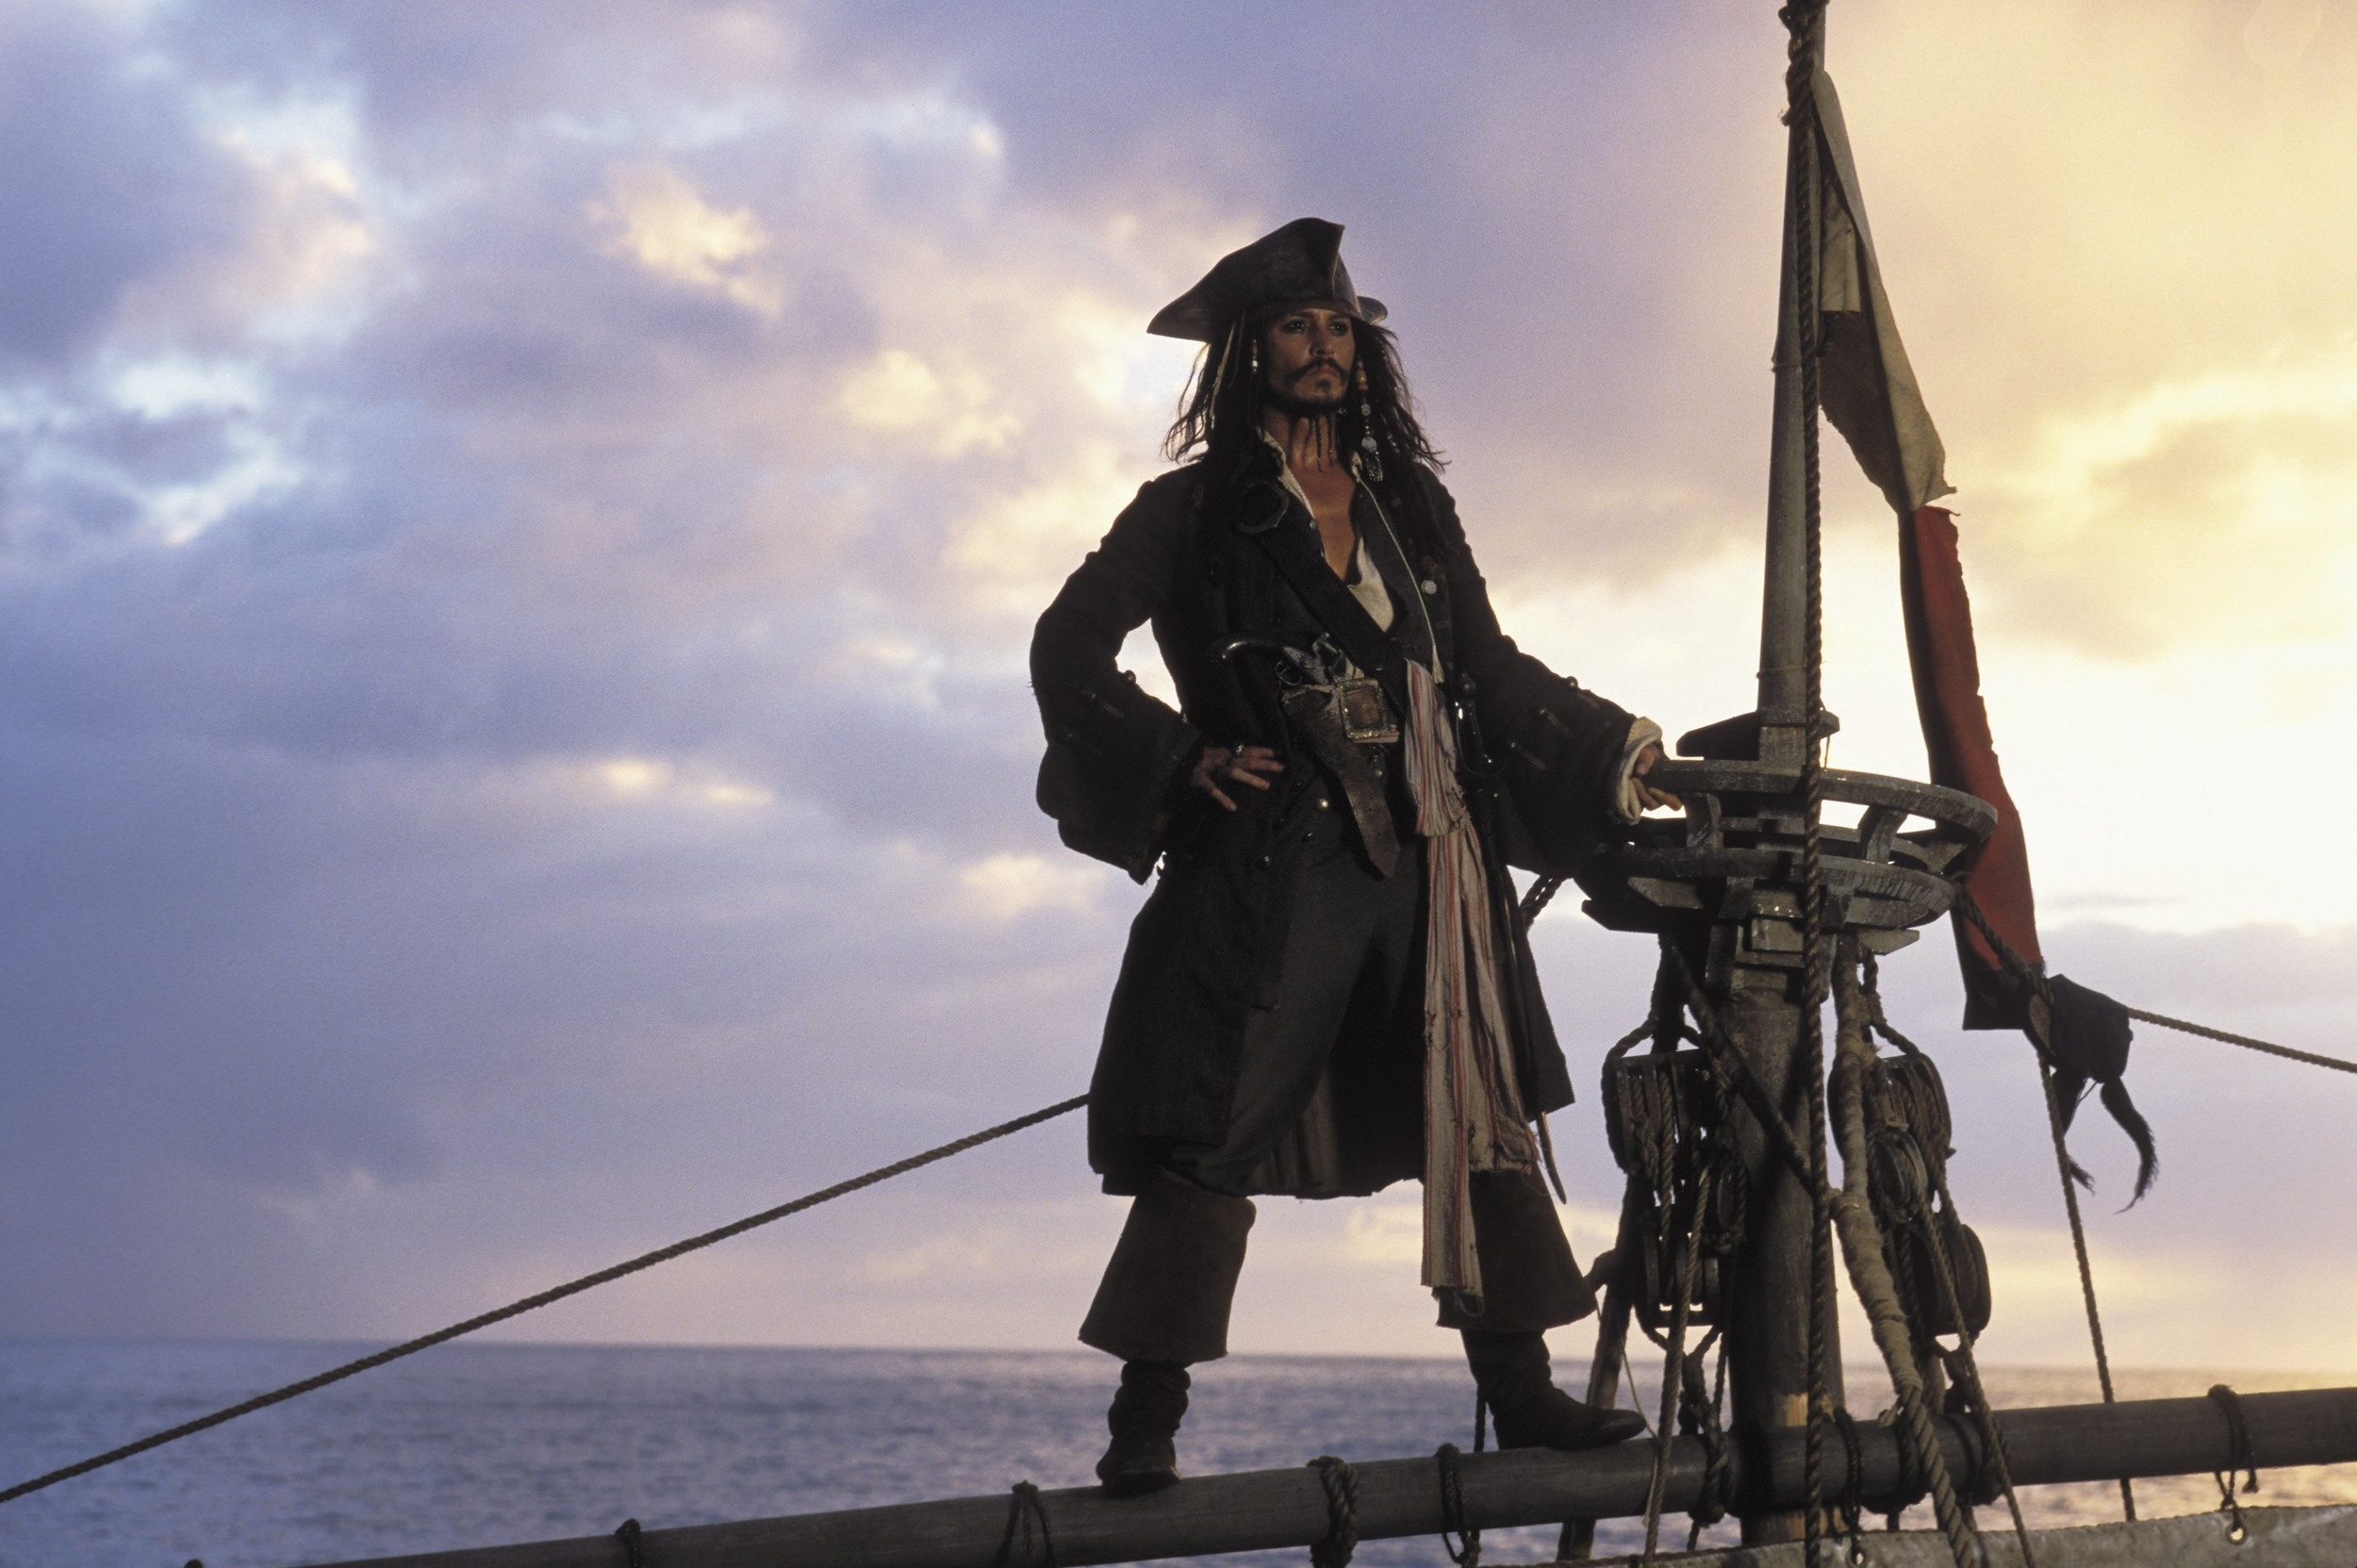 <p>Some Disney executives had the idea of, “Hey, let’s turn that Pirates of the Caribbean ride into a movie” in the early 2000s. The first person to take a crack at the screenplay was Jay Wolpert. Wolpert was approaching 60 when he turned to screenwriting. He spent most of his career as a game show producer, including creating the game show <em>Whew!</em> that has become a cult favorite on the Buzzr channel. Speaking of game shows, Wolpert first found success as a contestant on that front, winning the <em>Jeopardy!</em> "Tournament of Champions" in 1969.</p><p>You may also like: <a href='https://www.yardbarker.com/entertainment/articles/the_best_recurring_seinfeld_characters_022324/s1__28964030'>The best recurring Seinfeld characters</a></p>